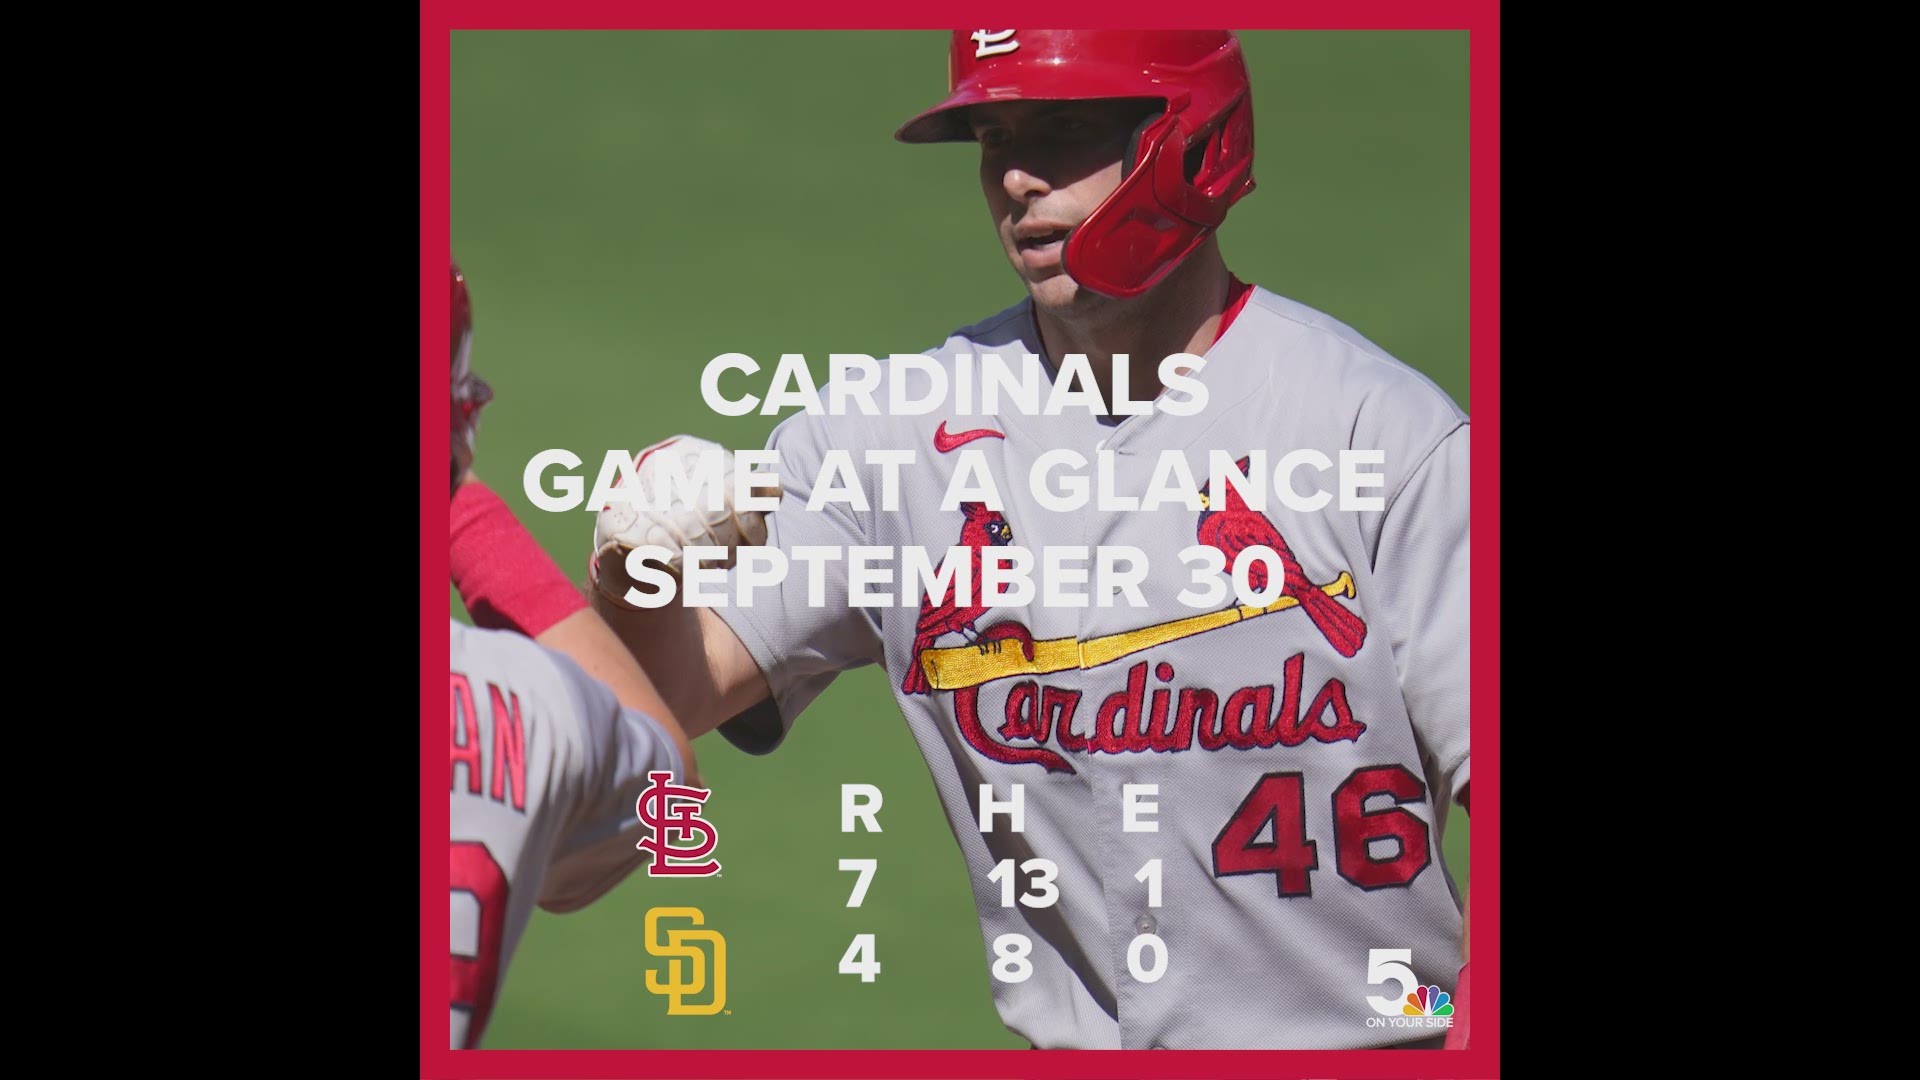 The Cardinals are a win away from advancing to the NLDS.